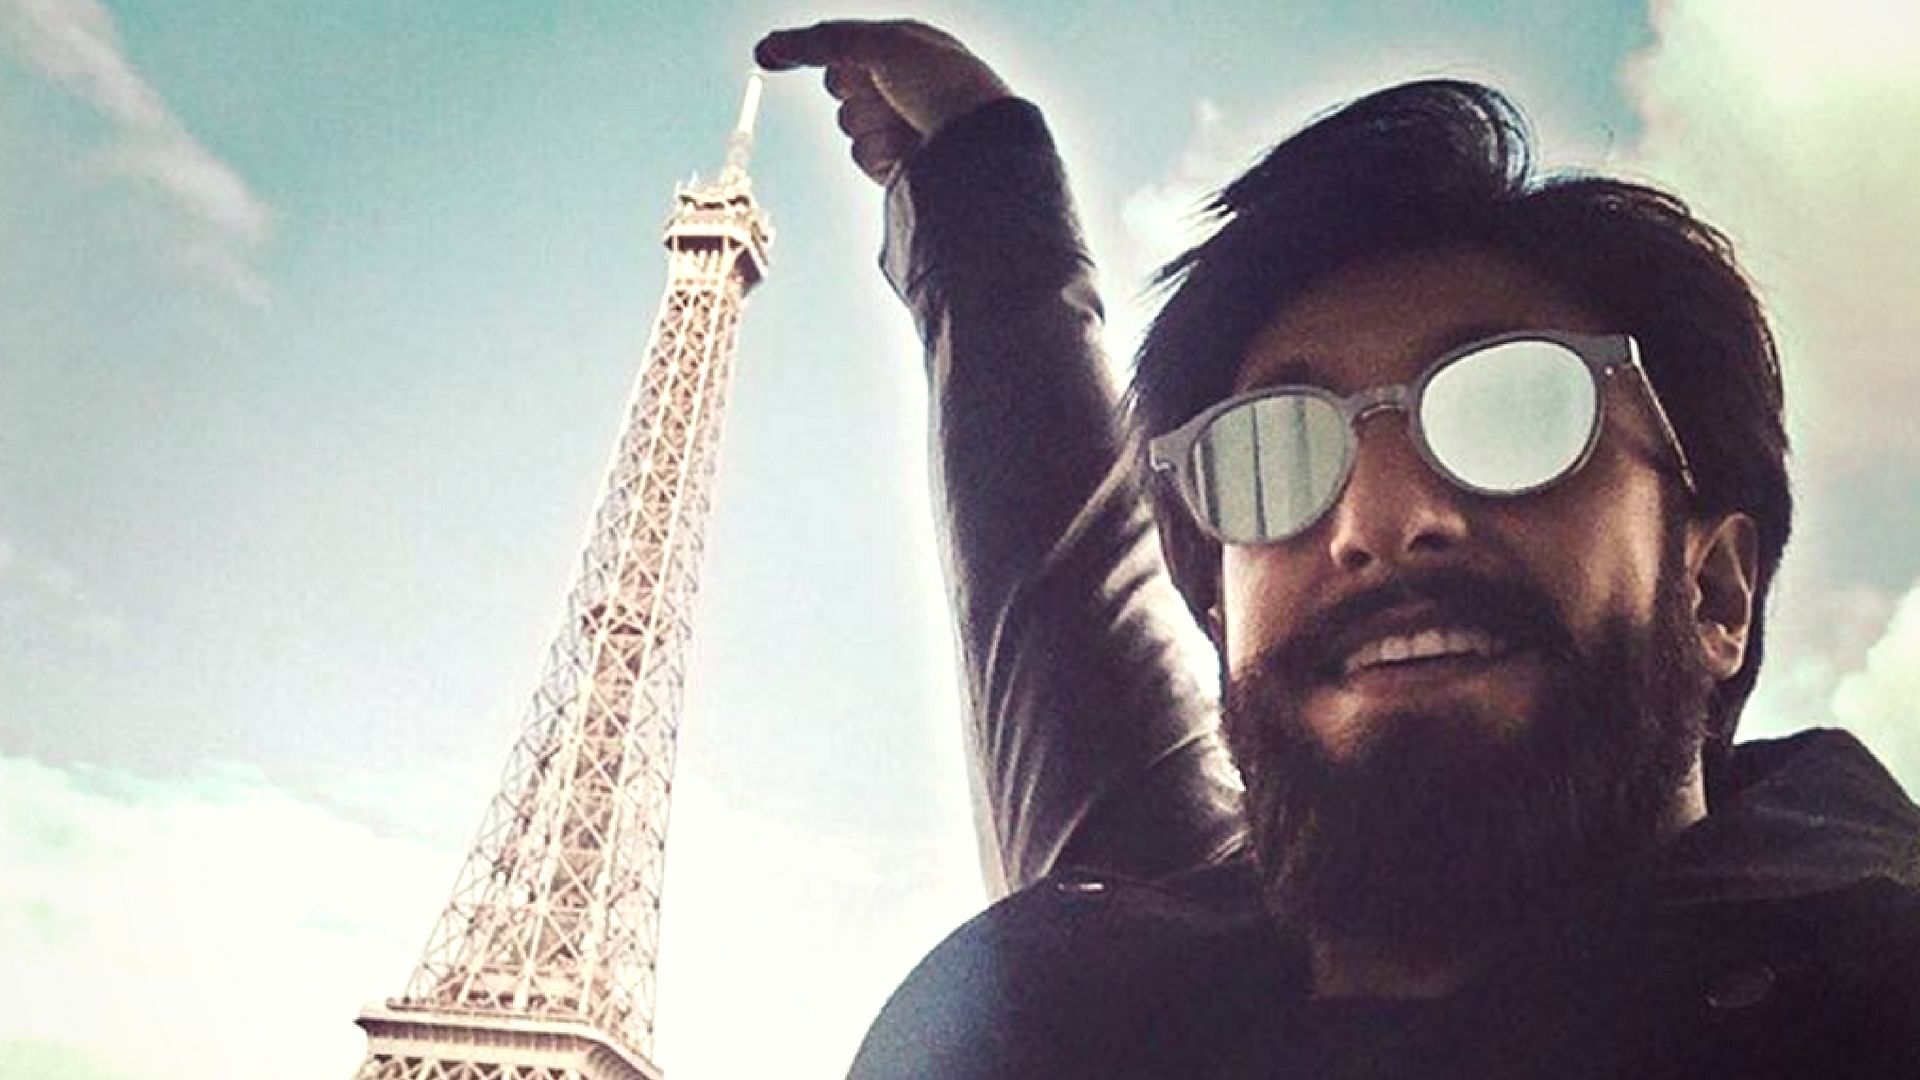 Ranveer is making Paris fall in love with his <i>Befikre</i> stunts. (Photo courtesy: Twitter/@RanveerOfficial)